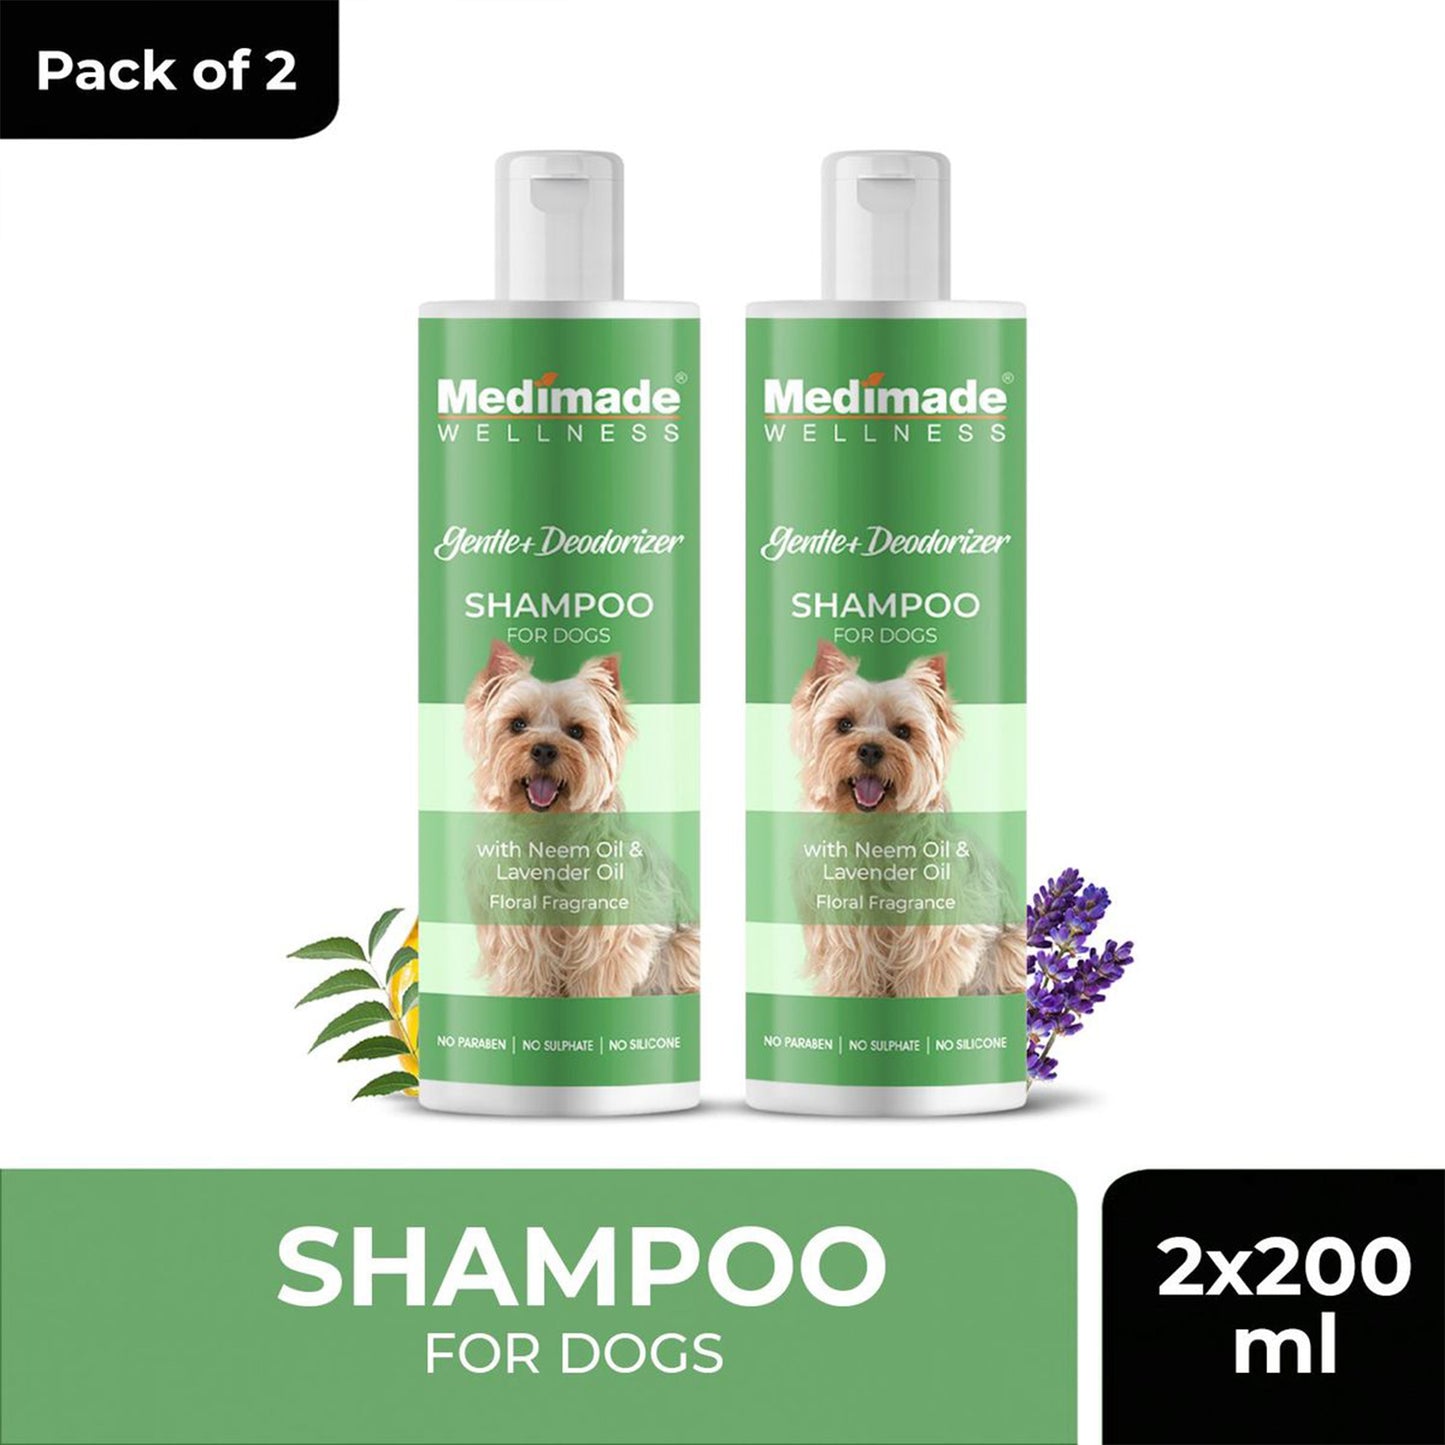 Medimade - Gentle Deodorizer Shampoo for Dogs with Neem & Lavender Oil For Dogs